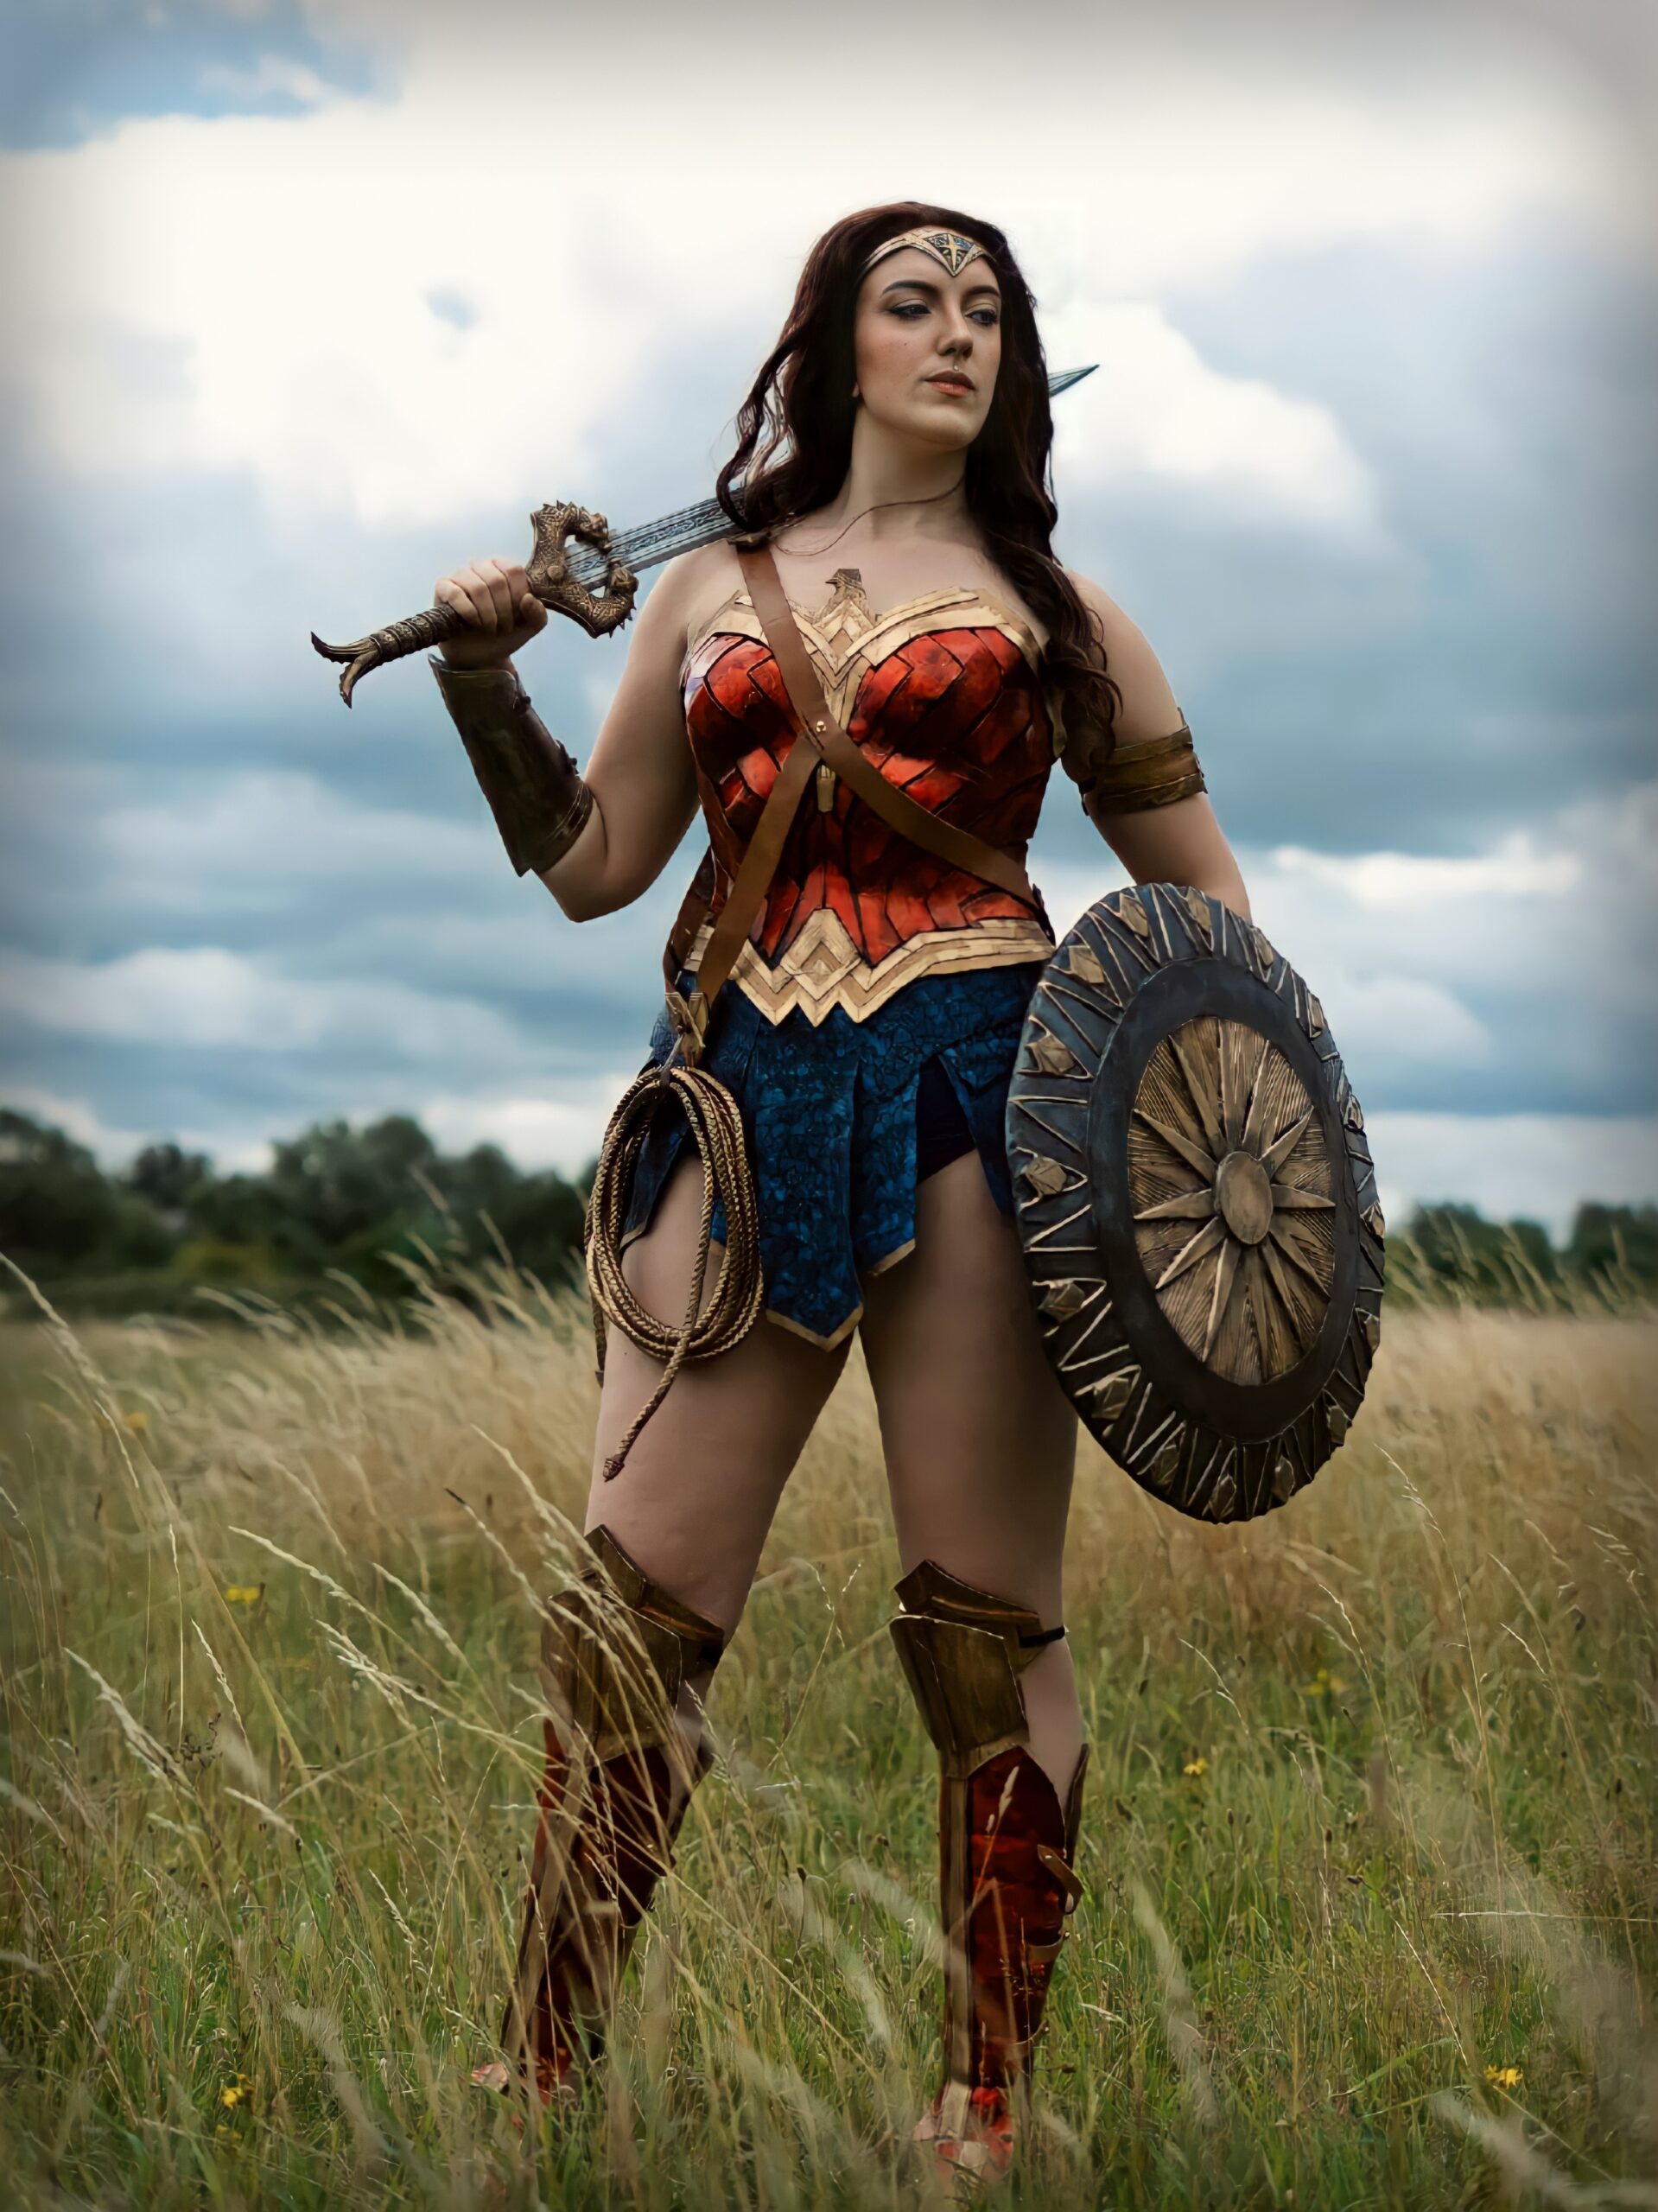 My Wonder Lady Cosplay – I made the costume by hand myself from Leather and Steel!